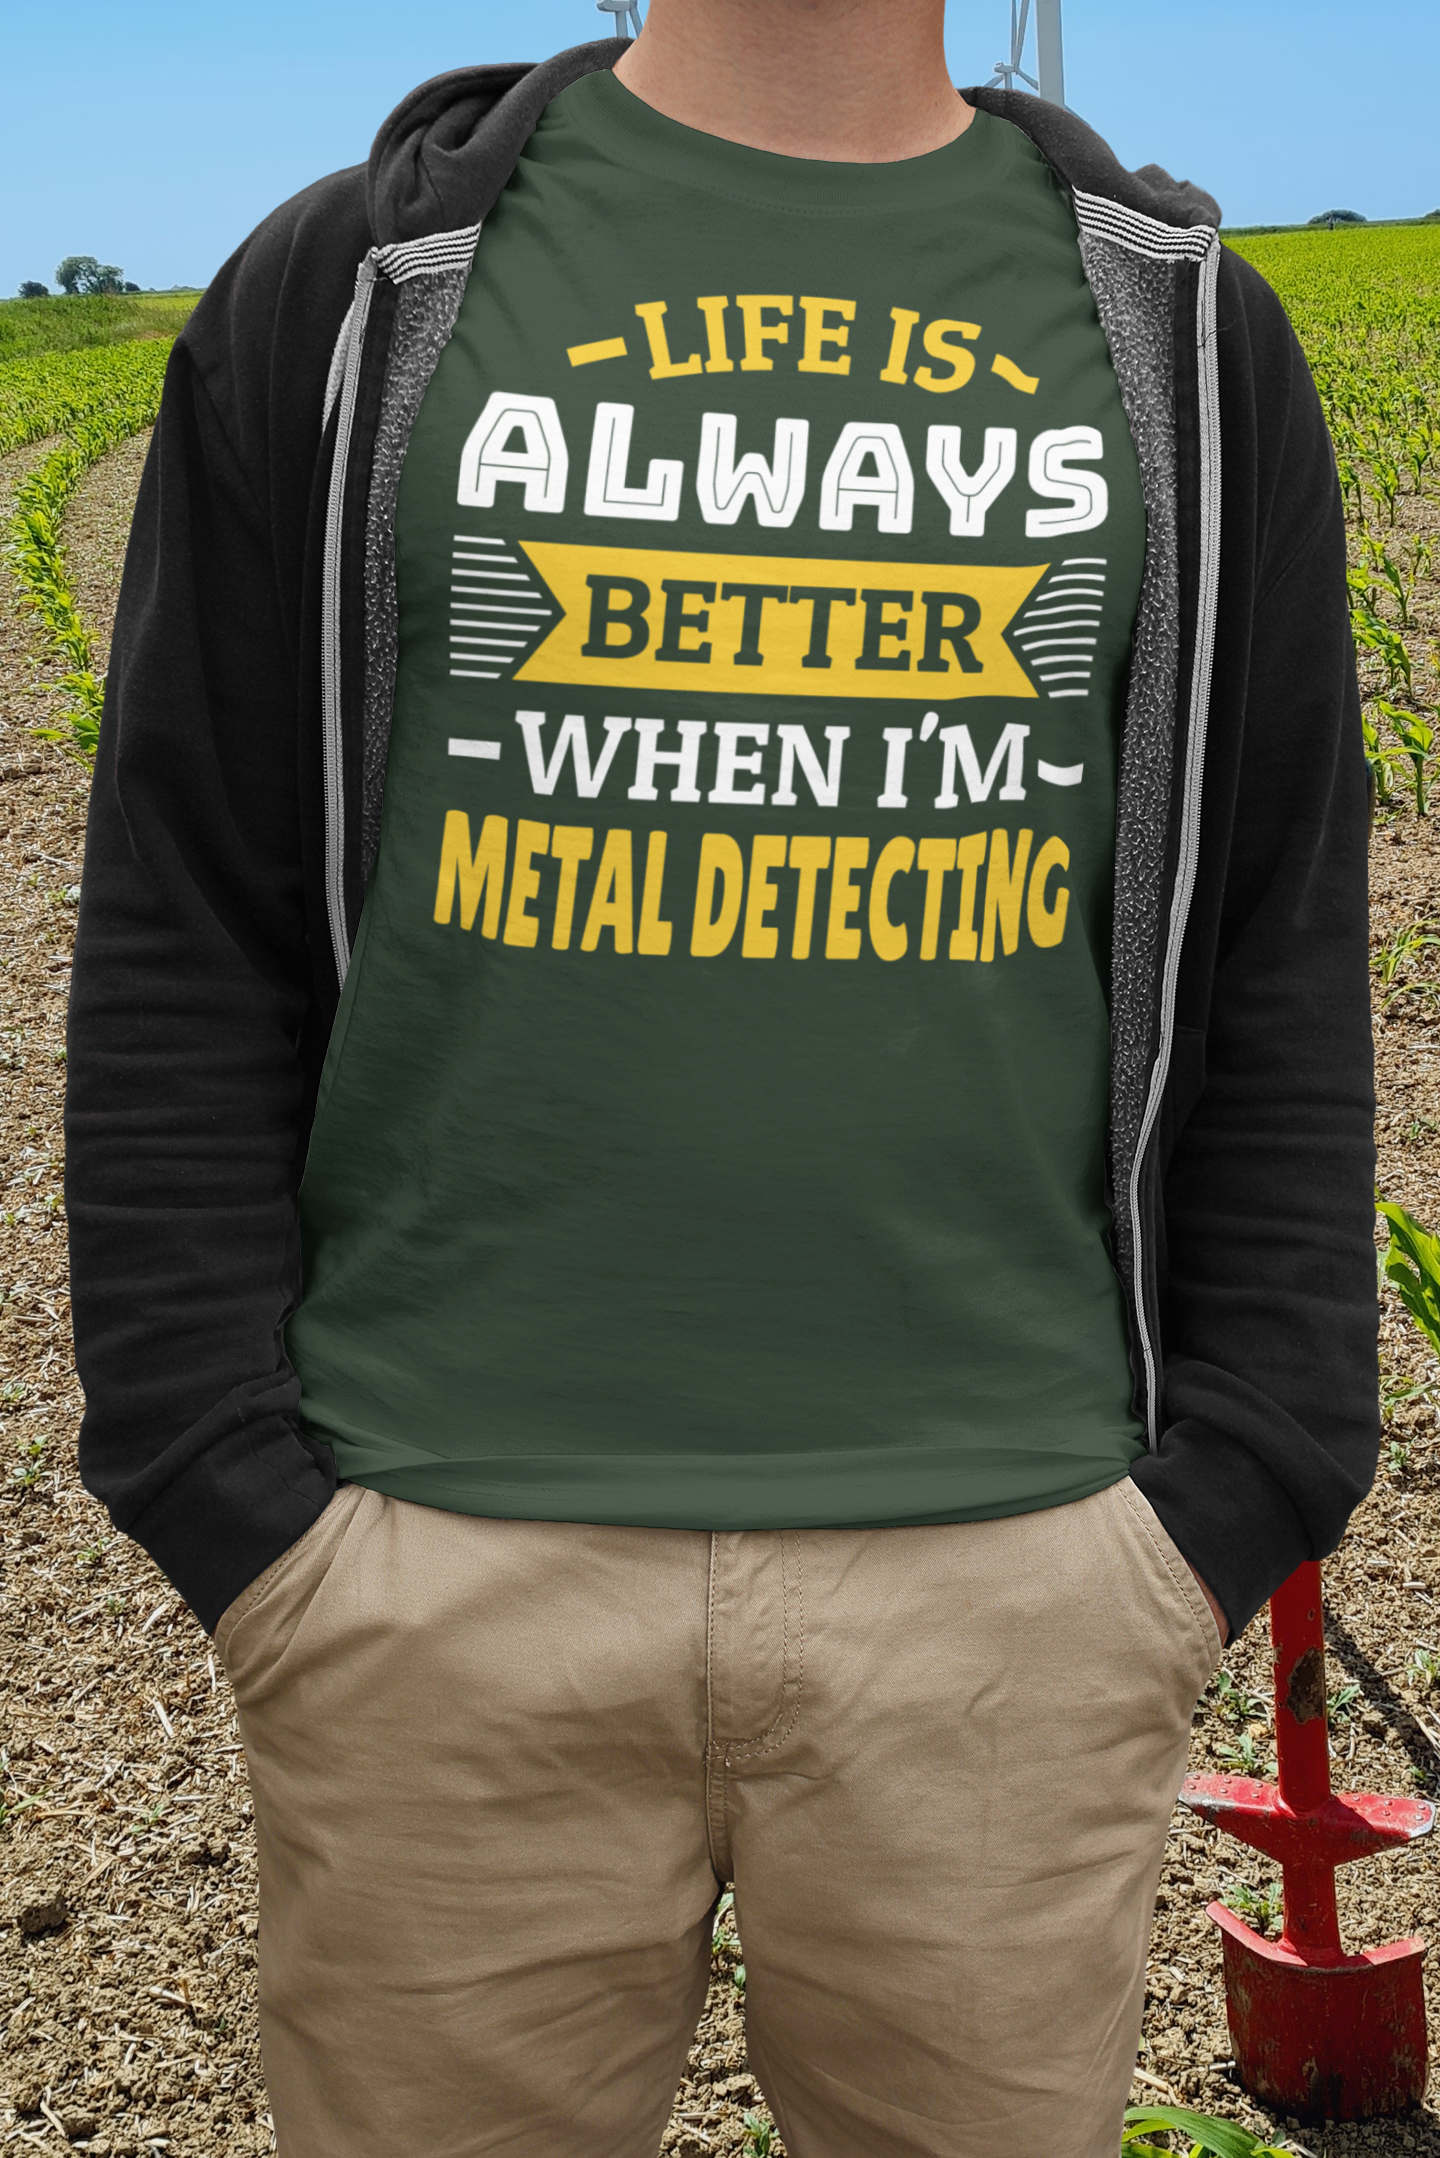 Life is always better when I'm metal detecting